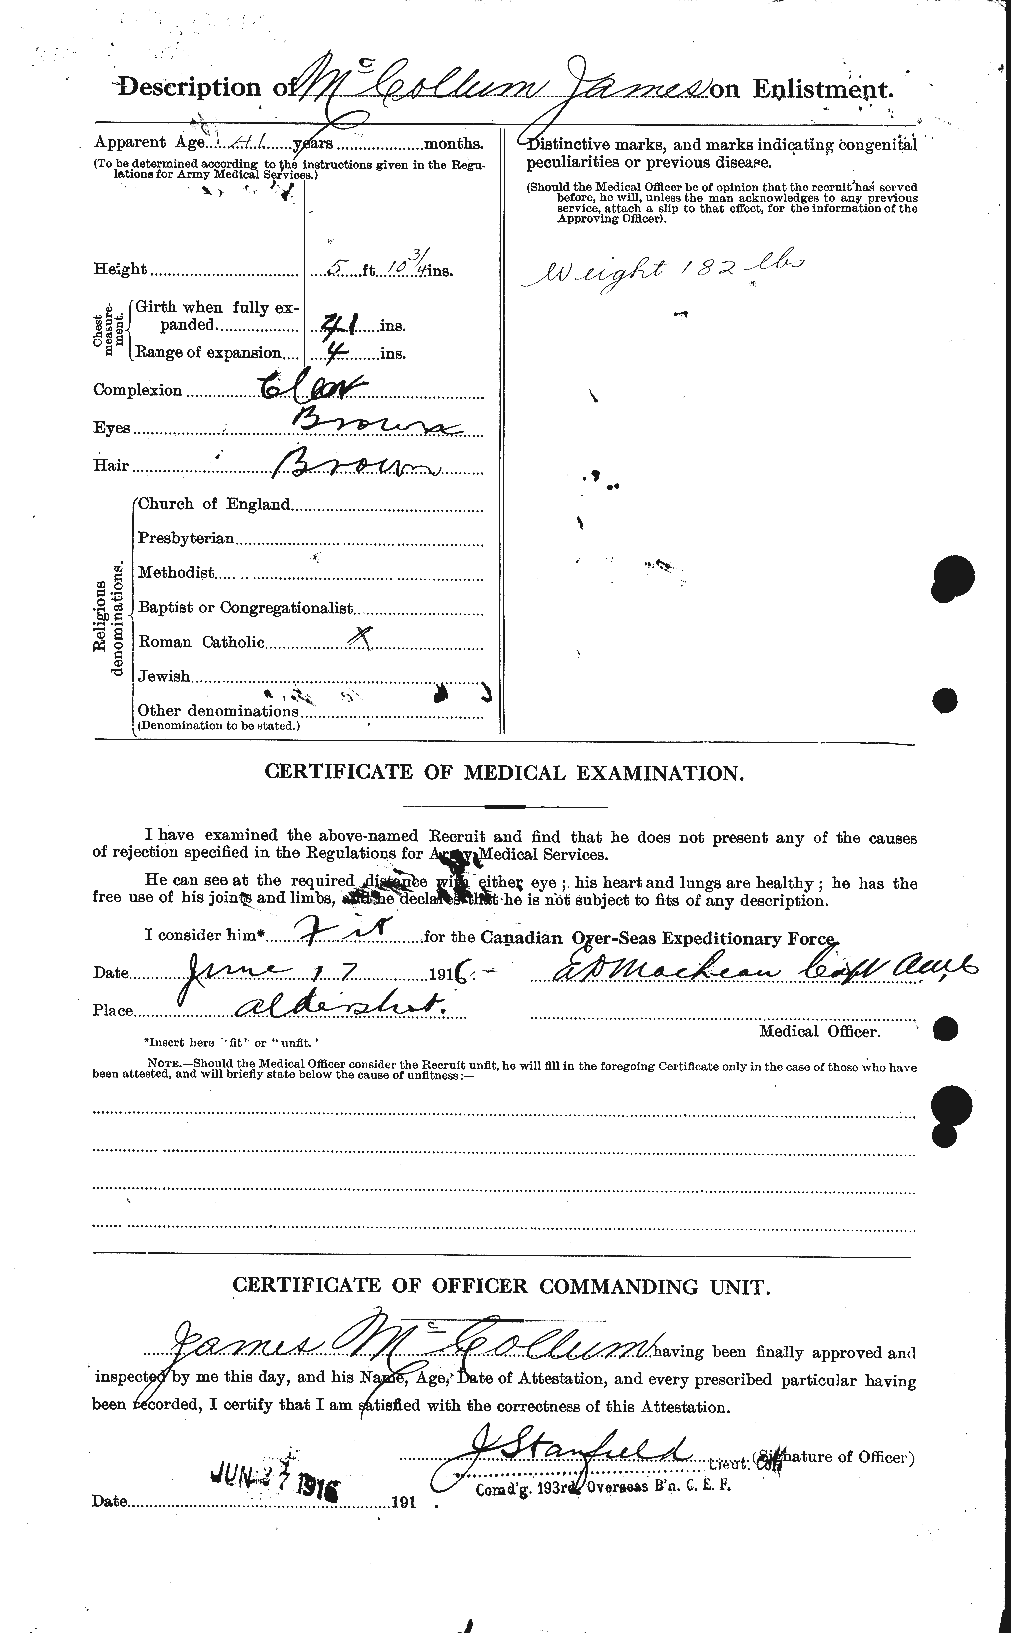 Personnel Records of the First World War - CEF 133340b